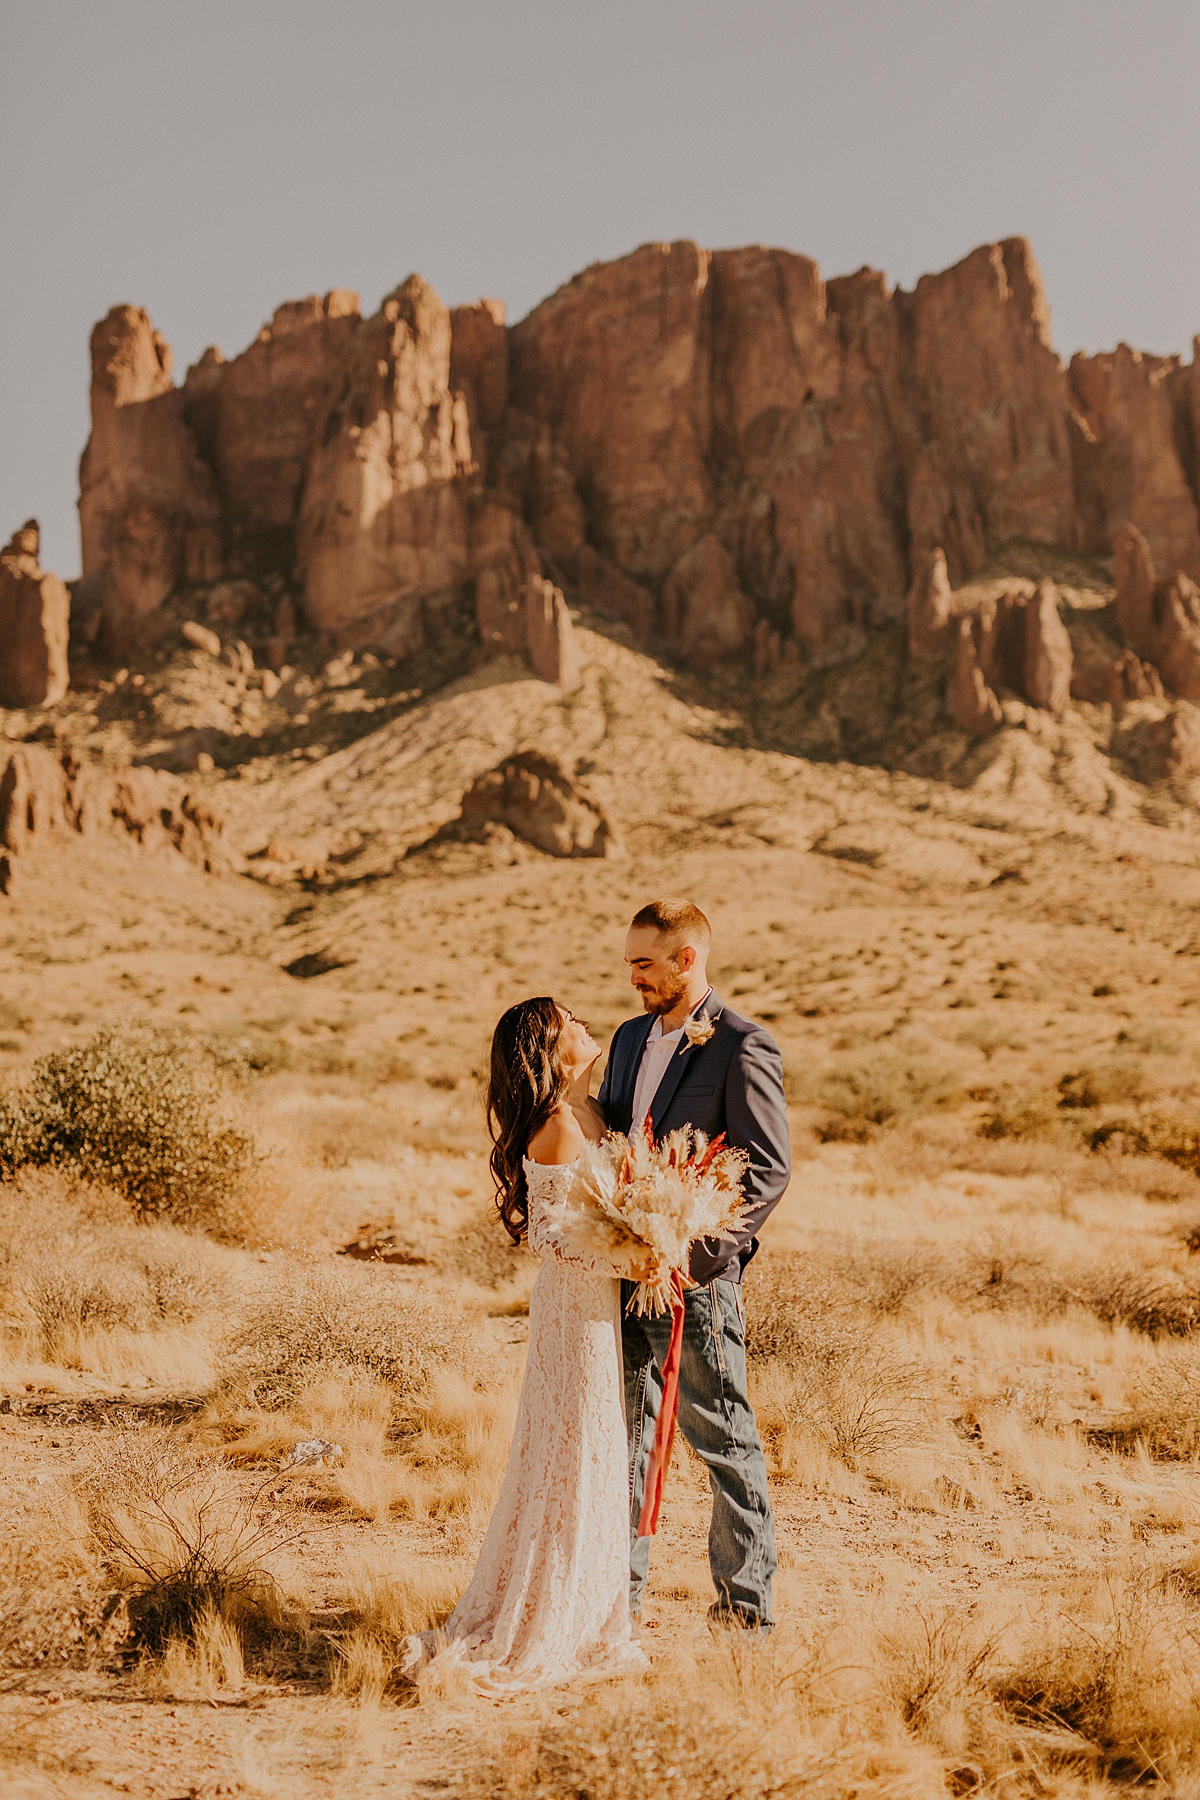 Intimate-elopement-in-superstition-mountain-wilderness-allison-slater-photography31.jpg